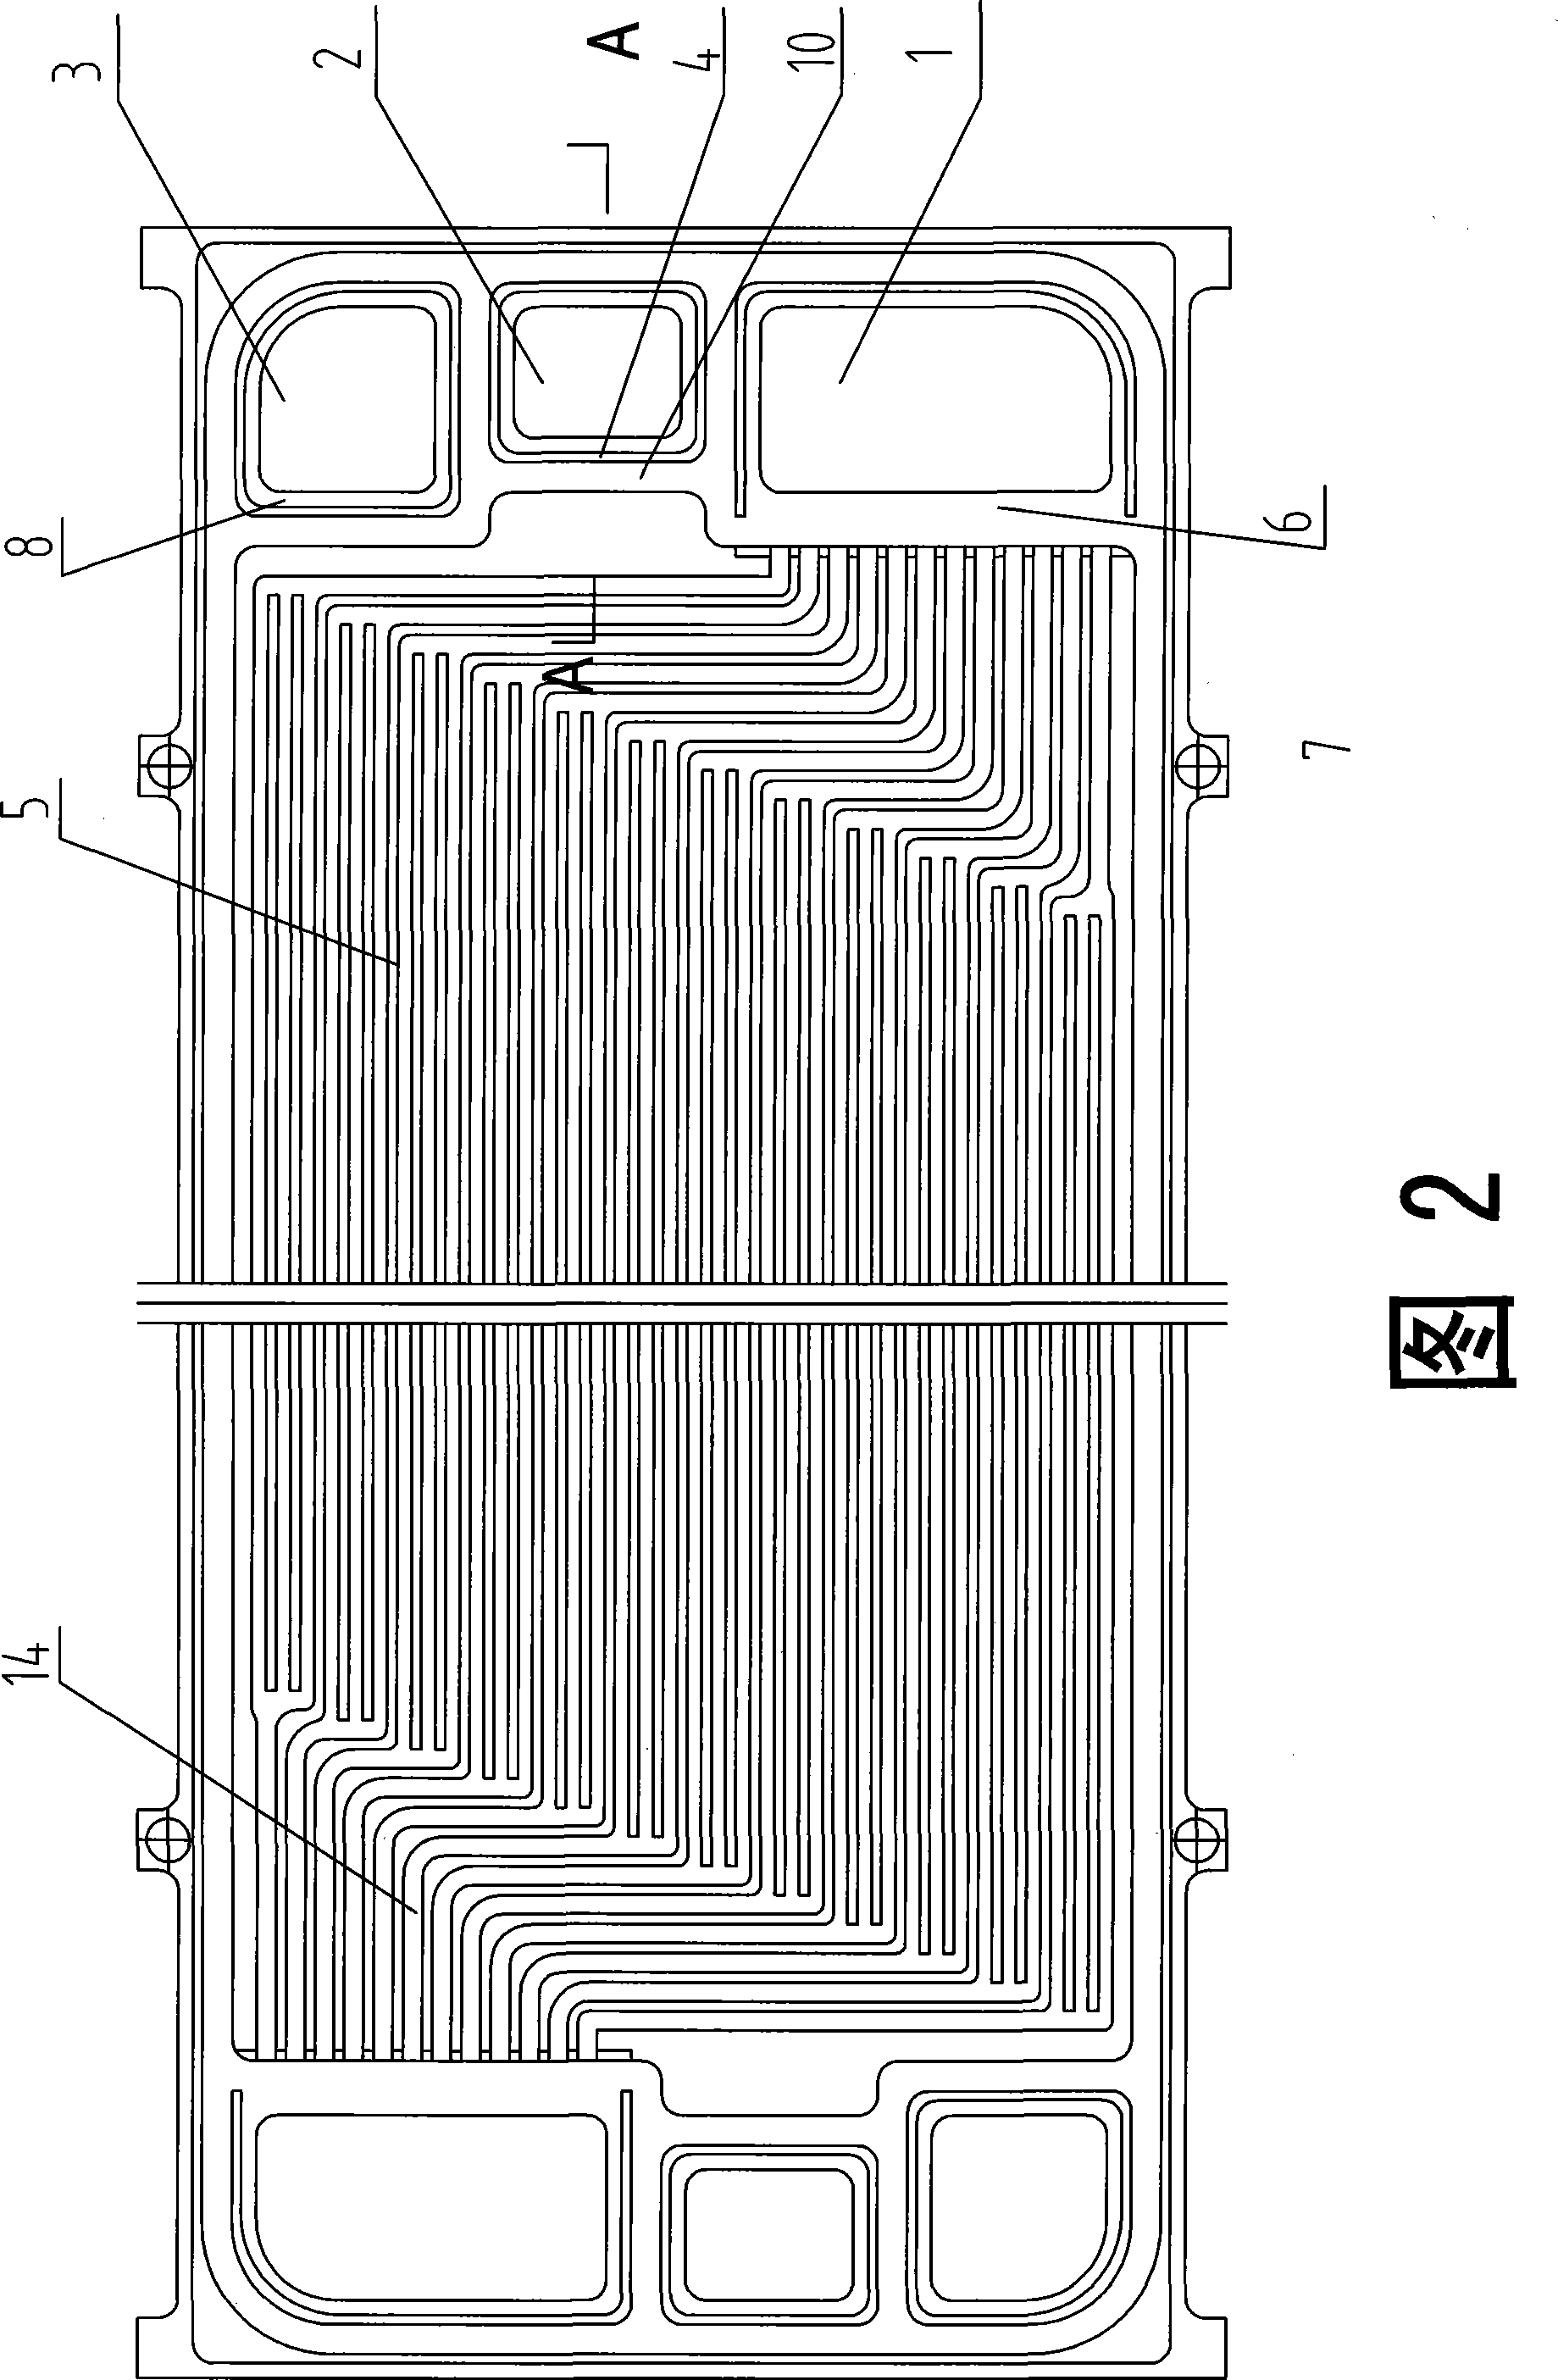 Metal bipolar plate for proton exchange membrane fuel cell